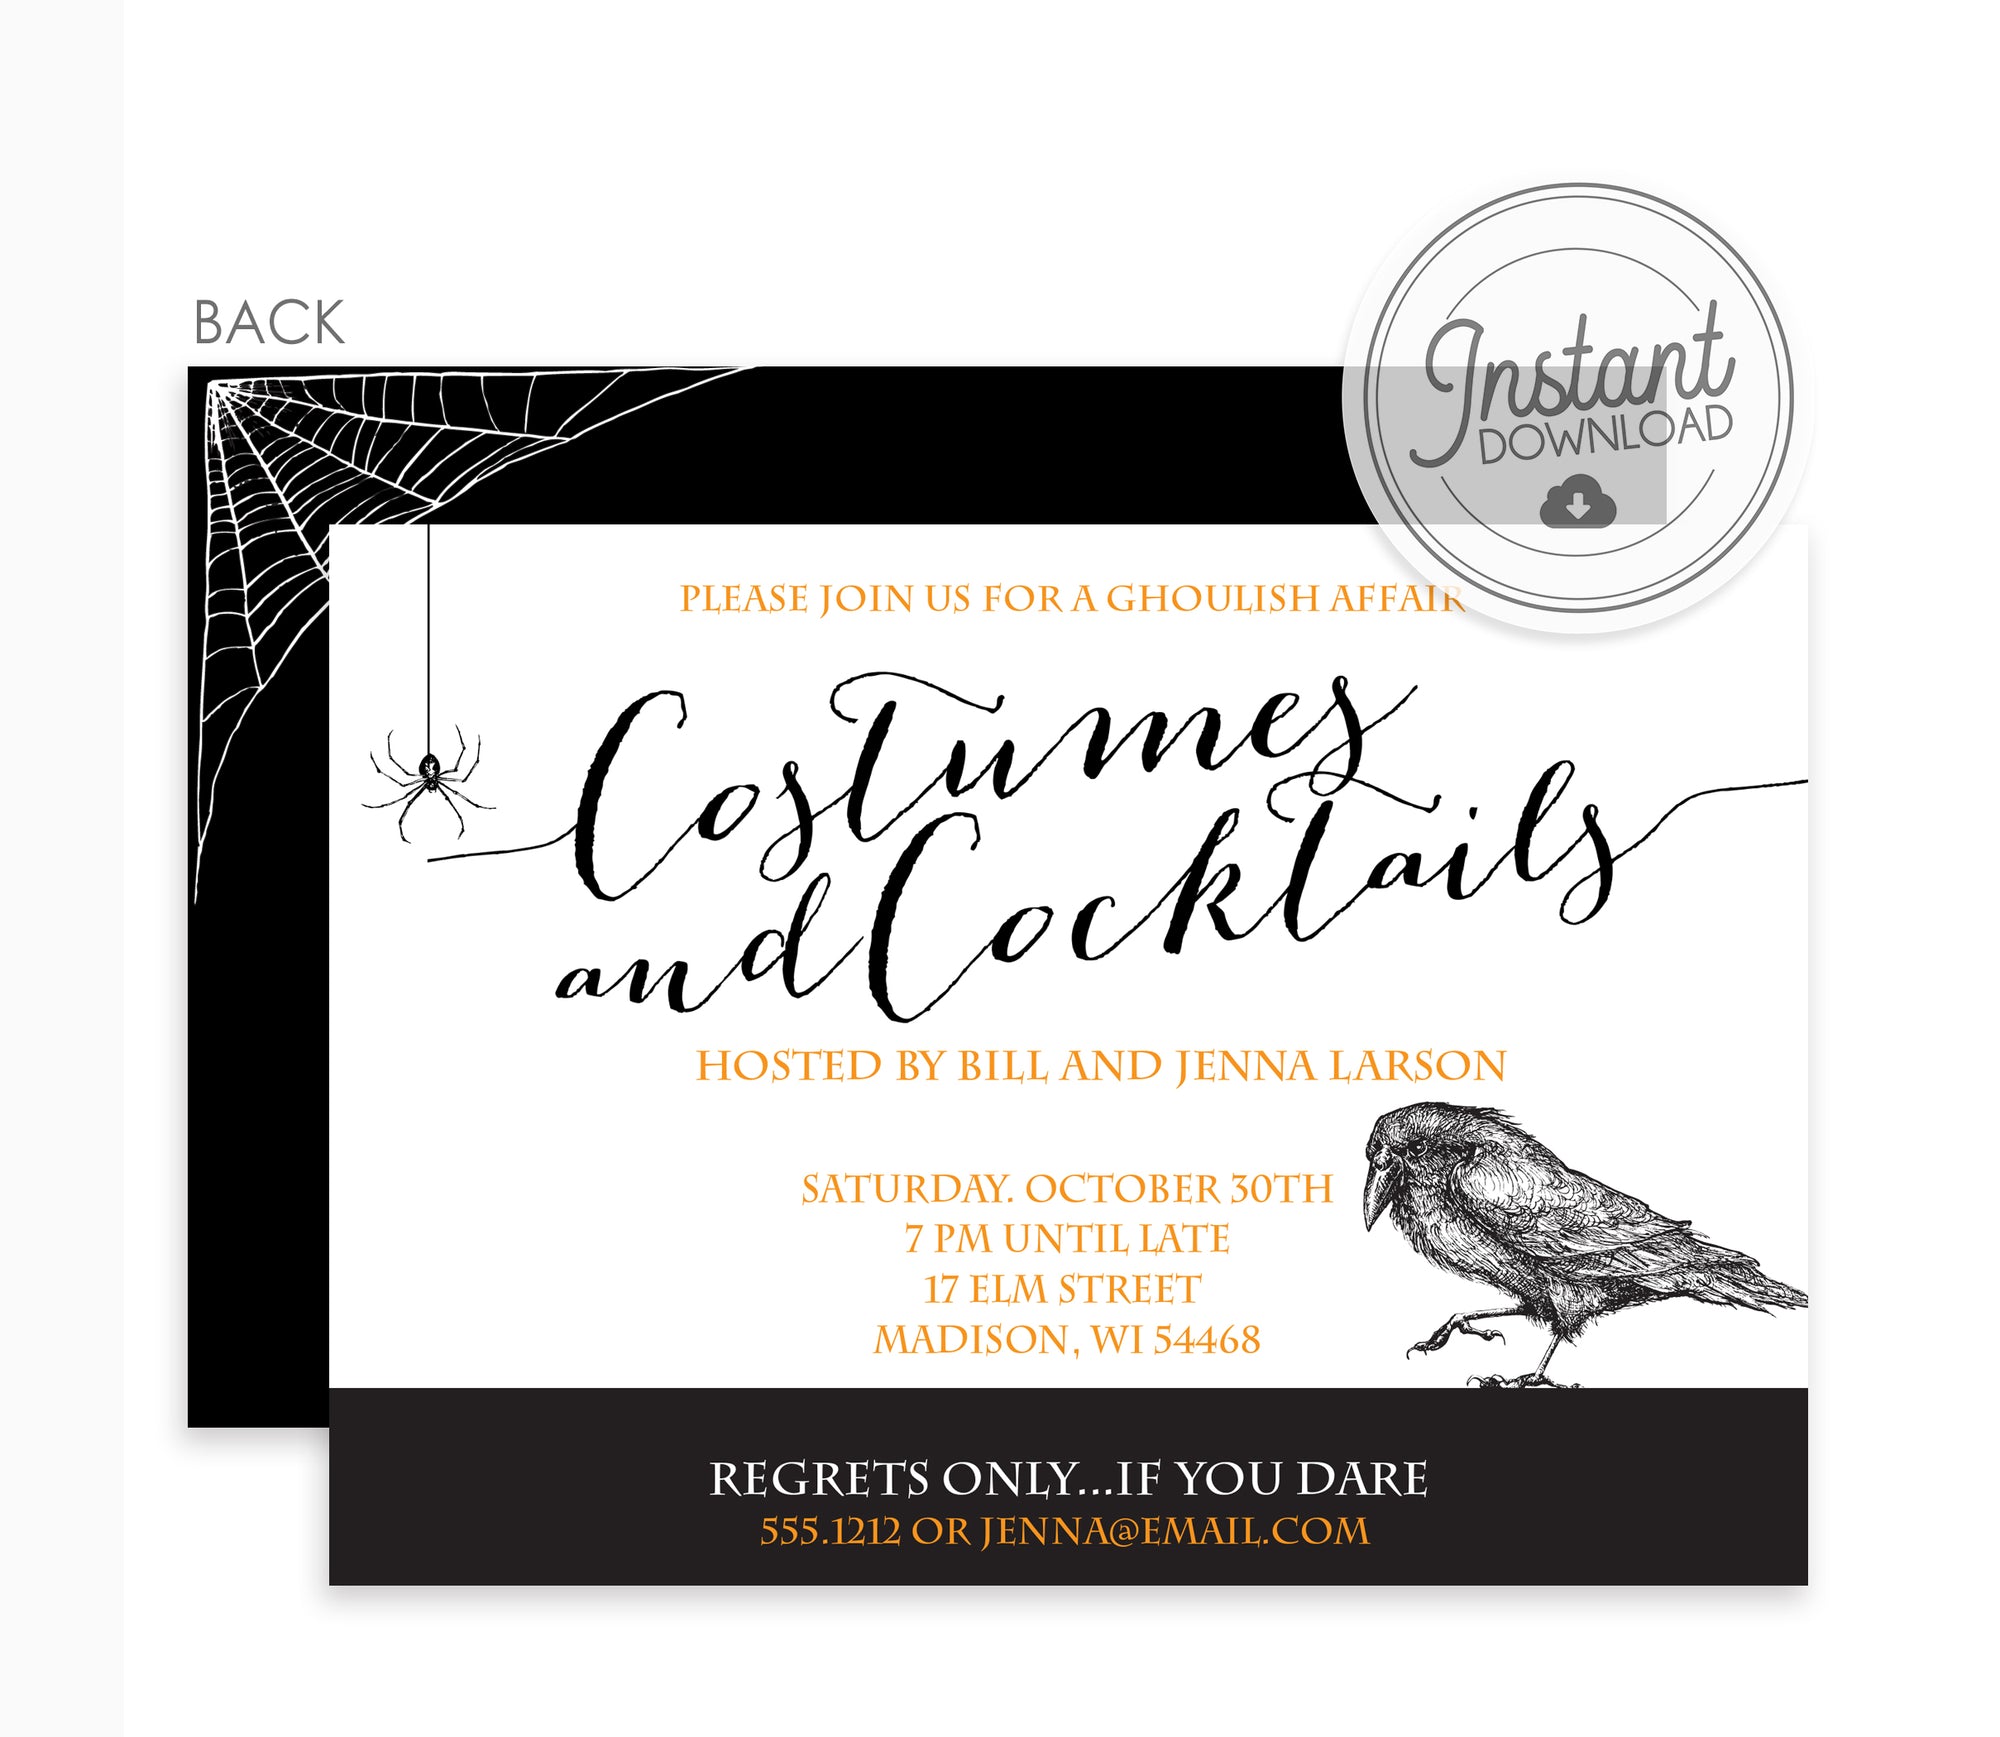 Costumes and Cocktails Halloween Party Invitation | Instant Download DIY | PIPSY.COM